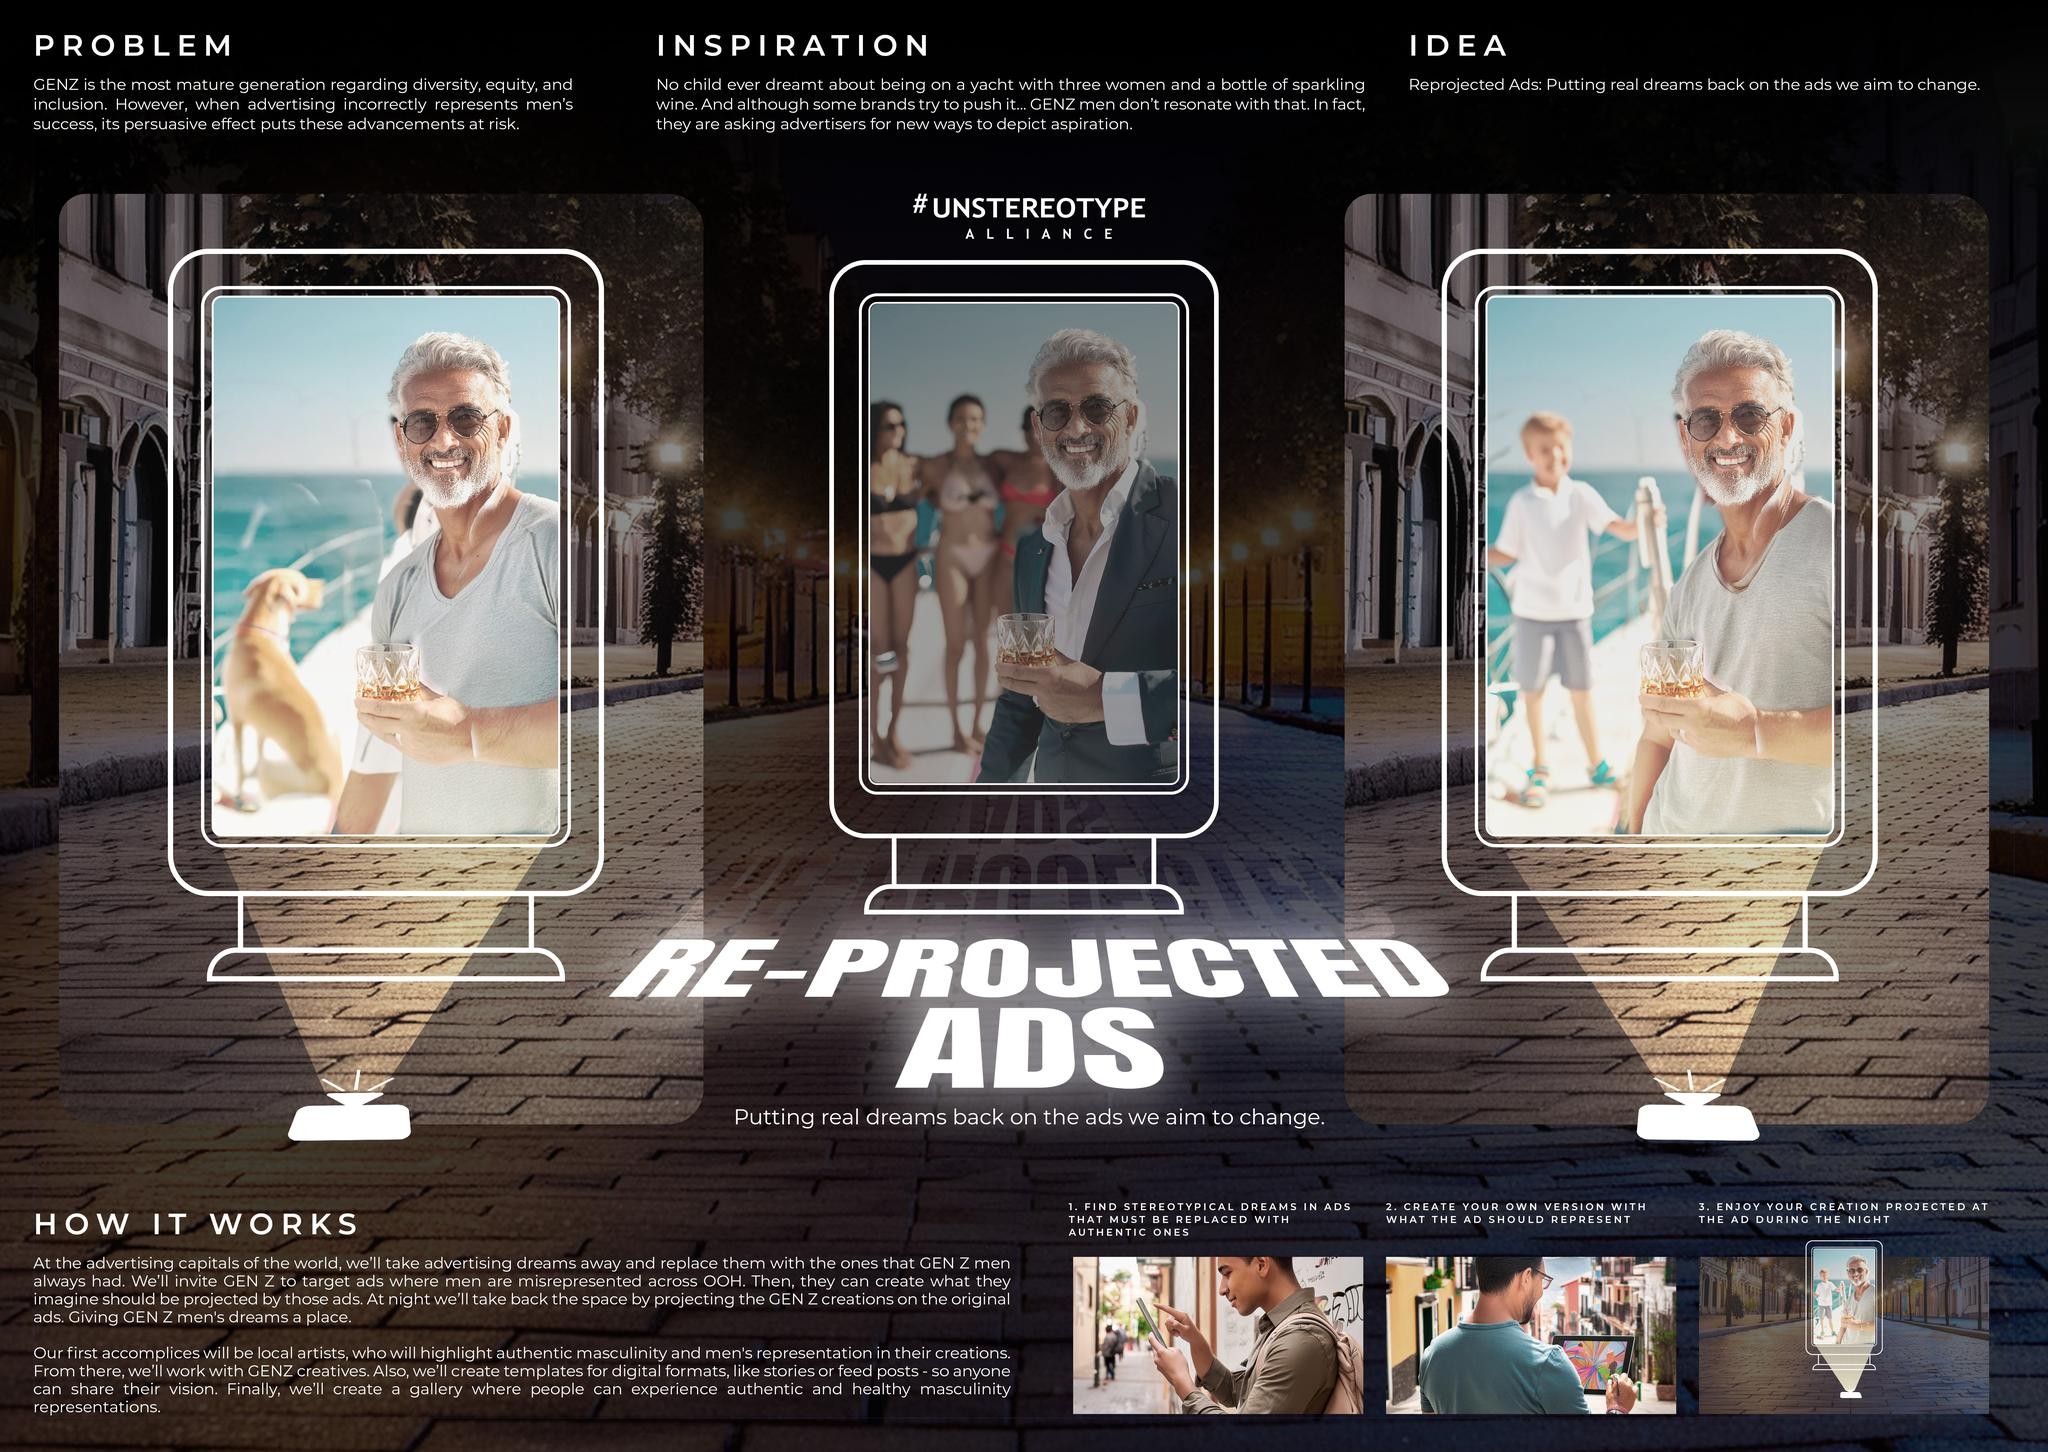 Re-Projected Ads